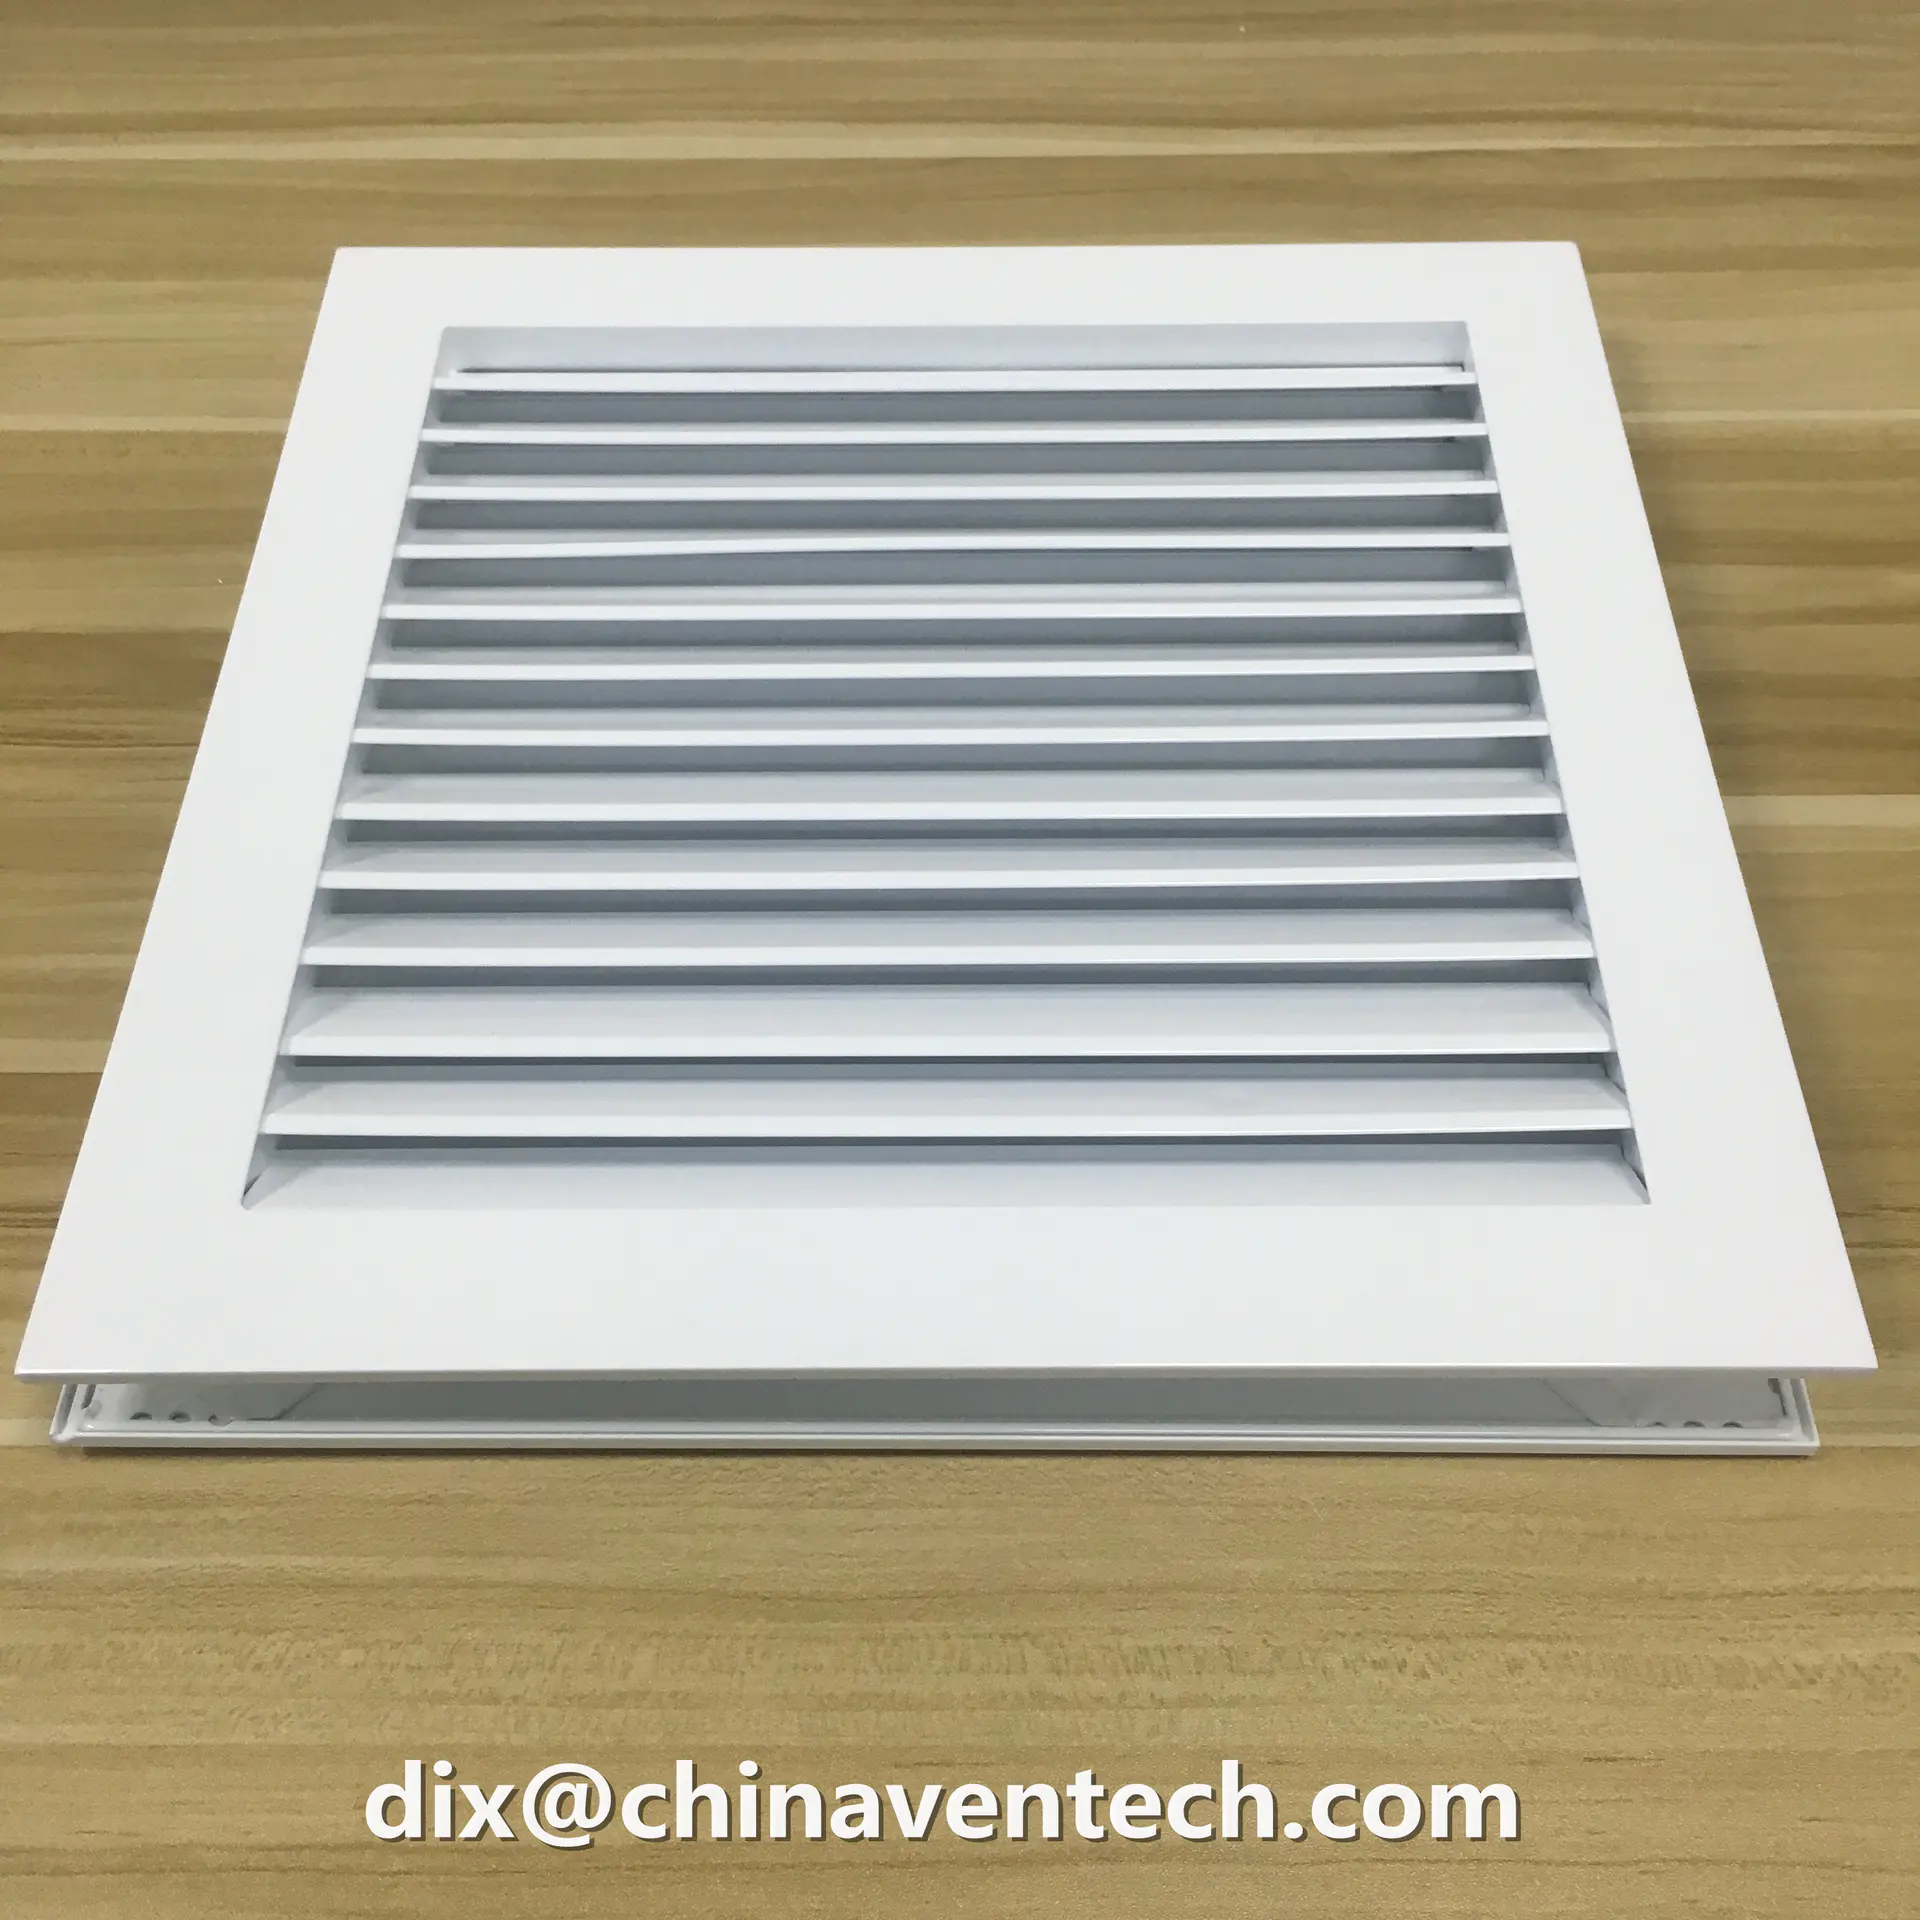 Hvac System Panel Ceiling Access Galvanized Teel Grill Folding Door For Ventilation